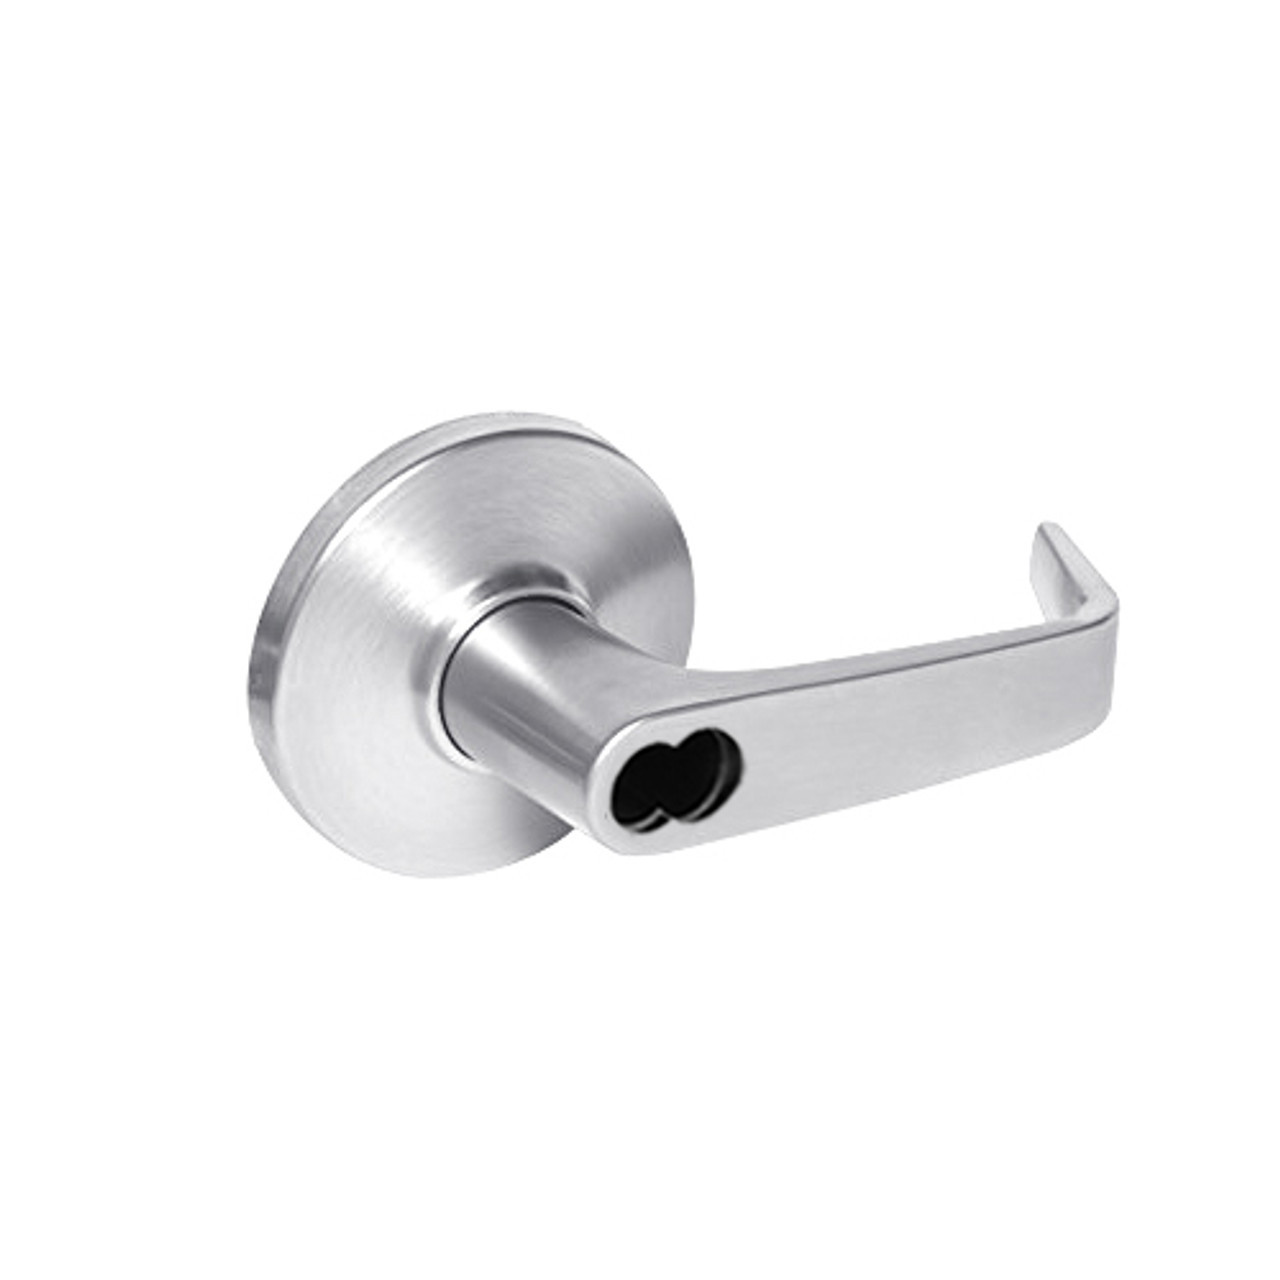 9K37DR15DS3625LM Best 9K Series Special Function Cylindrical Lever Locks with Contour Angle with Return Lever Design Accept 7 Pin Best Core in Bright Chrome